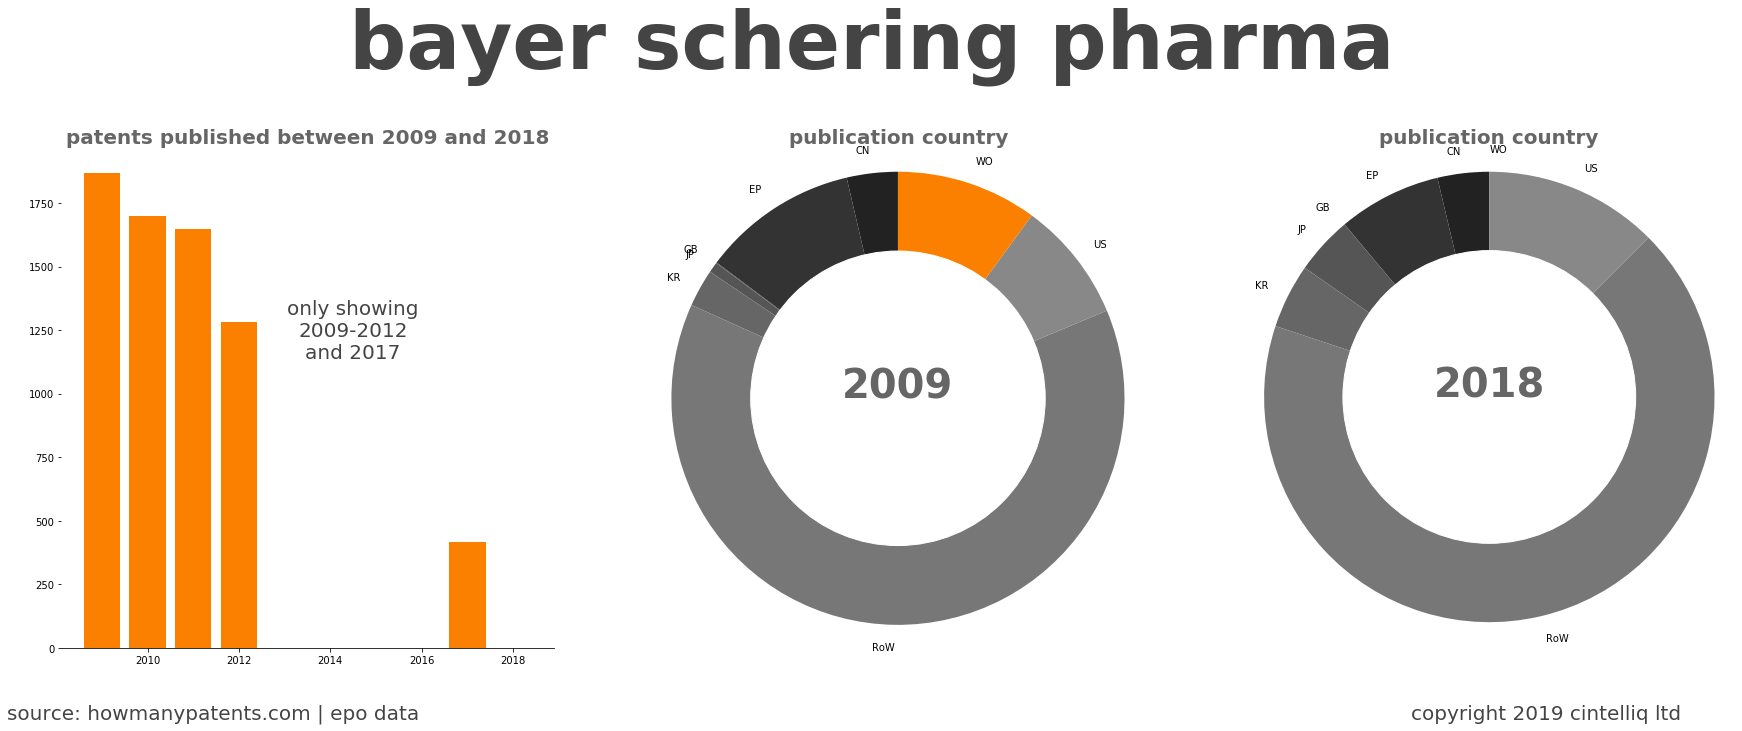 summary of patents for Bayer Schering Pharma